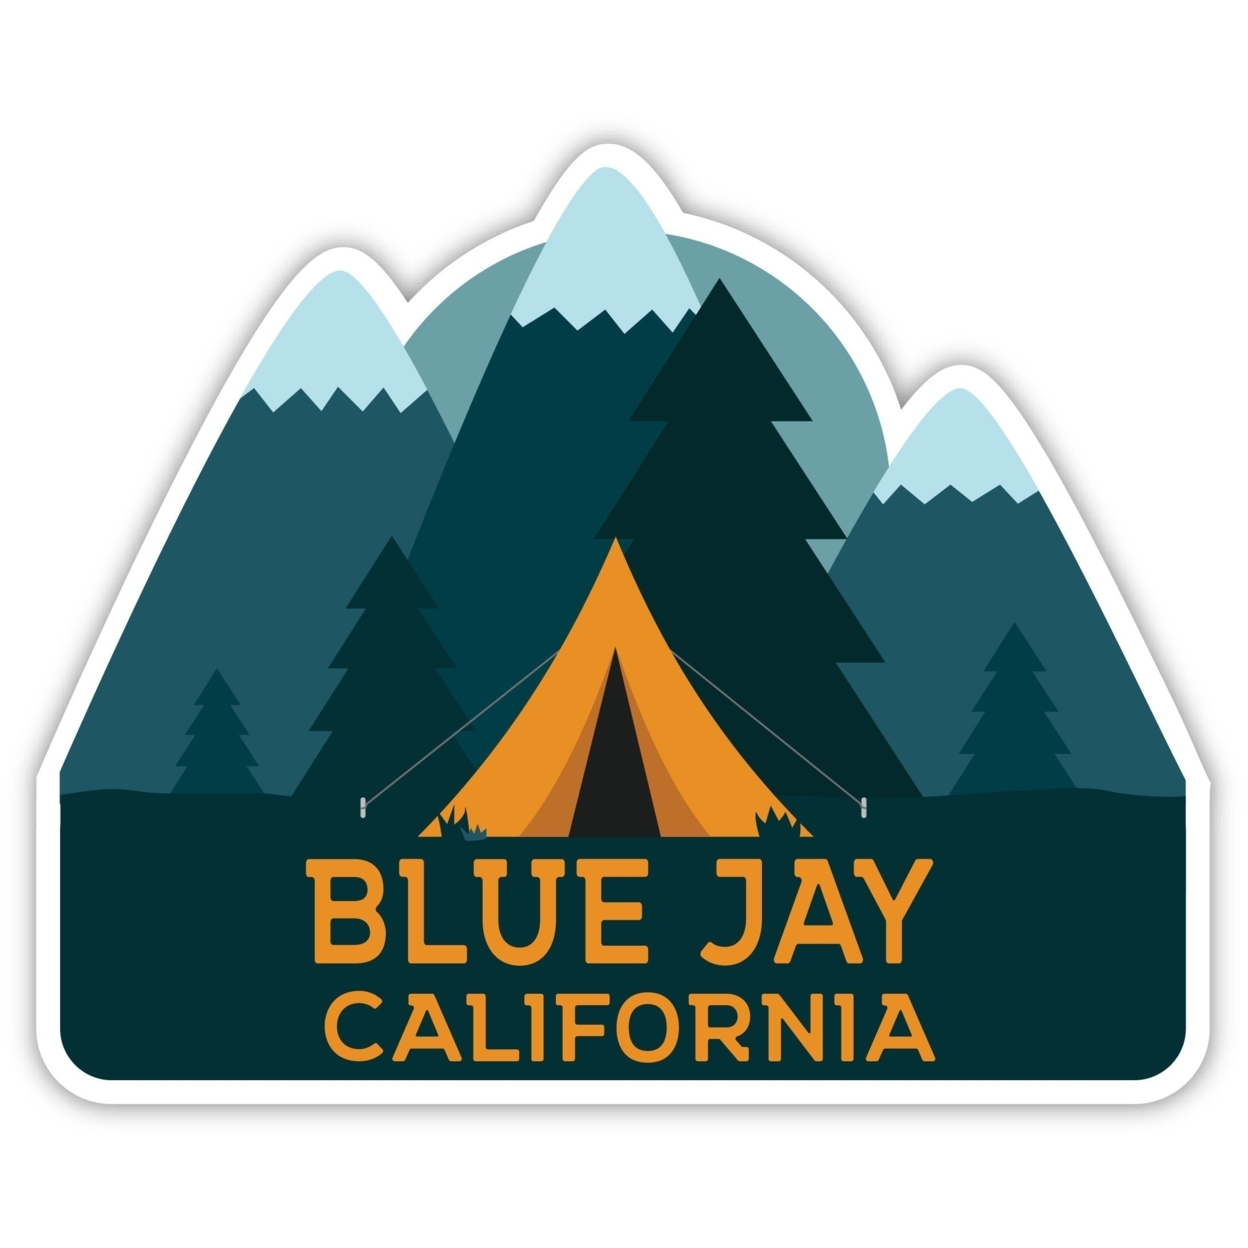 Blue Jay California Souvenir Decorative Stickers (Choose Theme And Size) - 4-Pack, 12-Inch, Tent